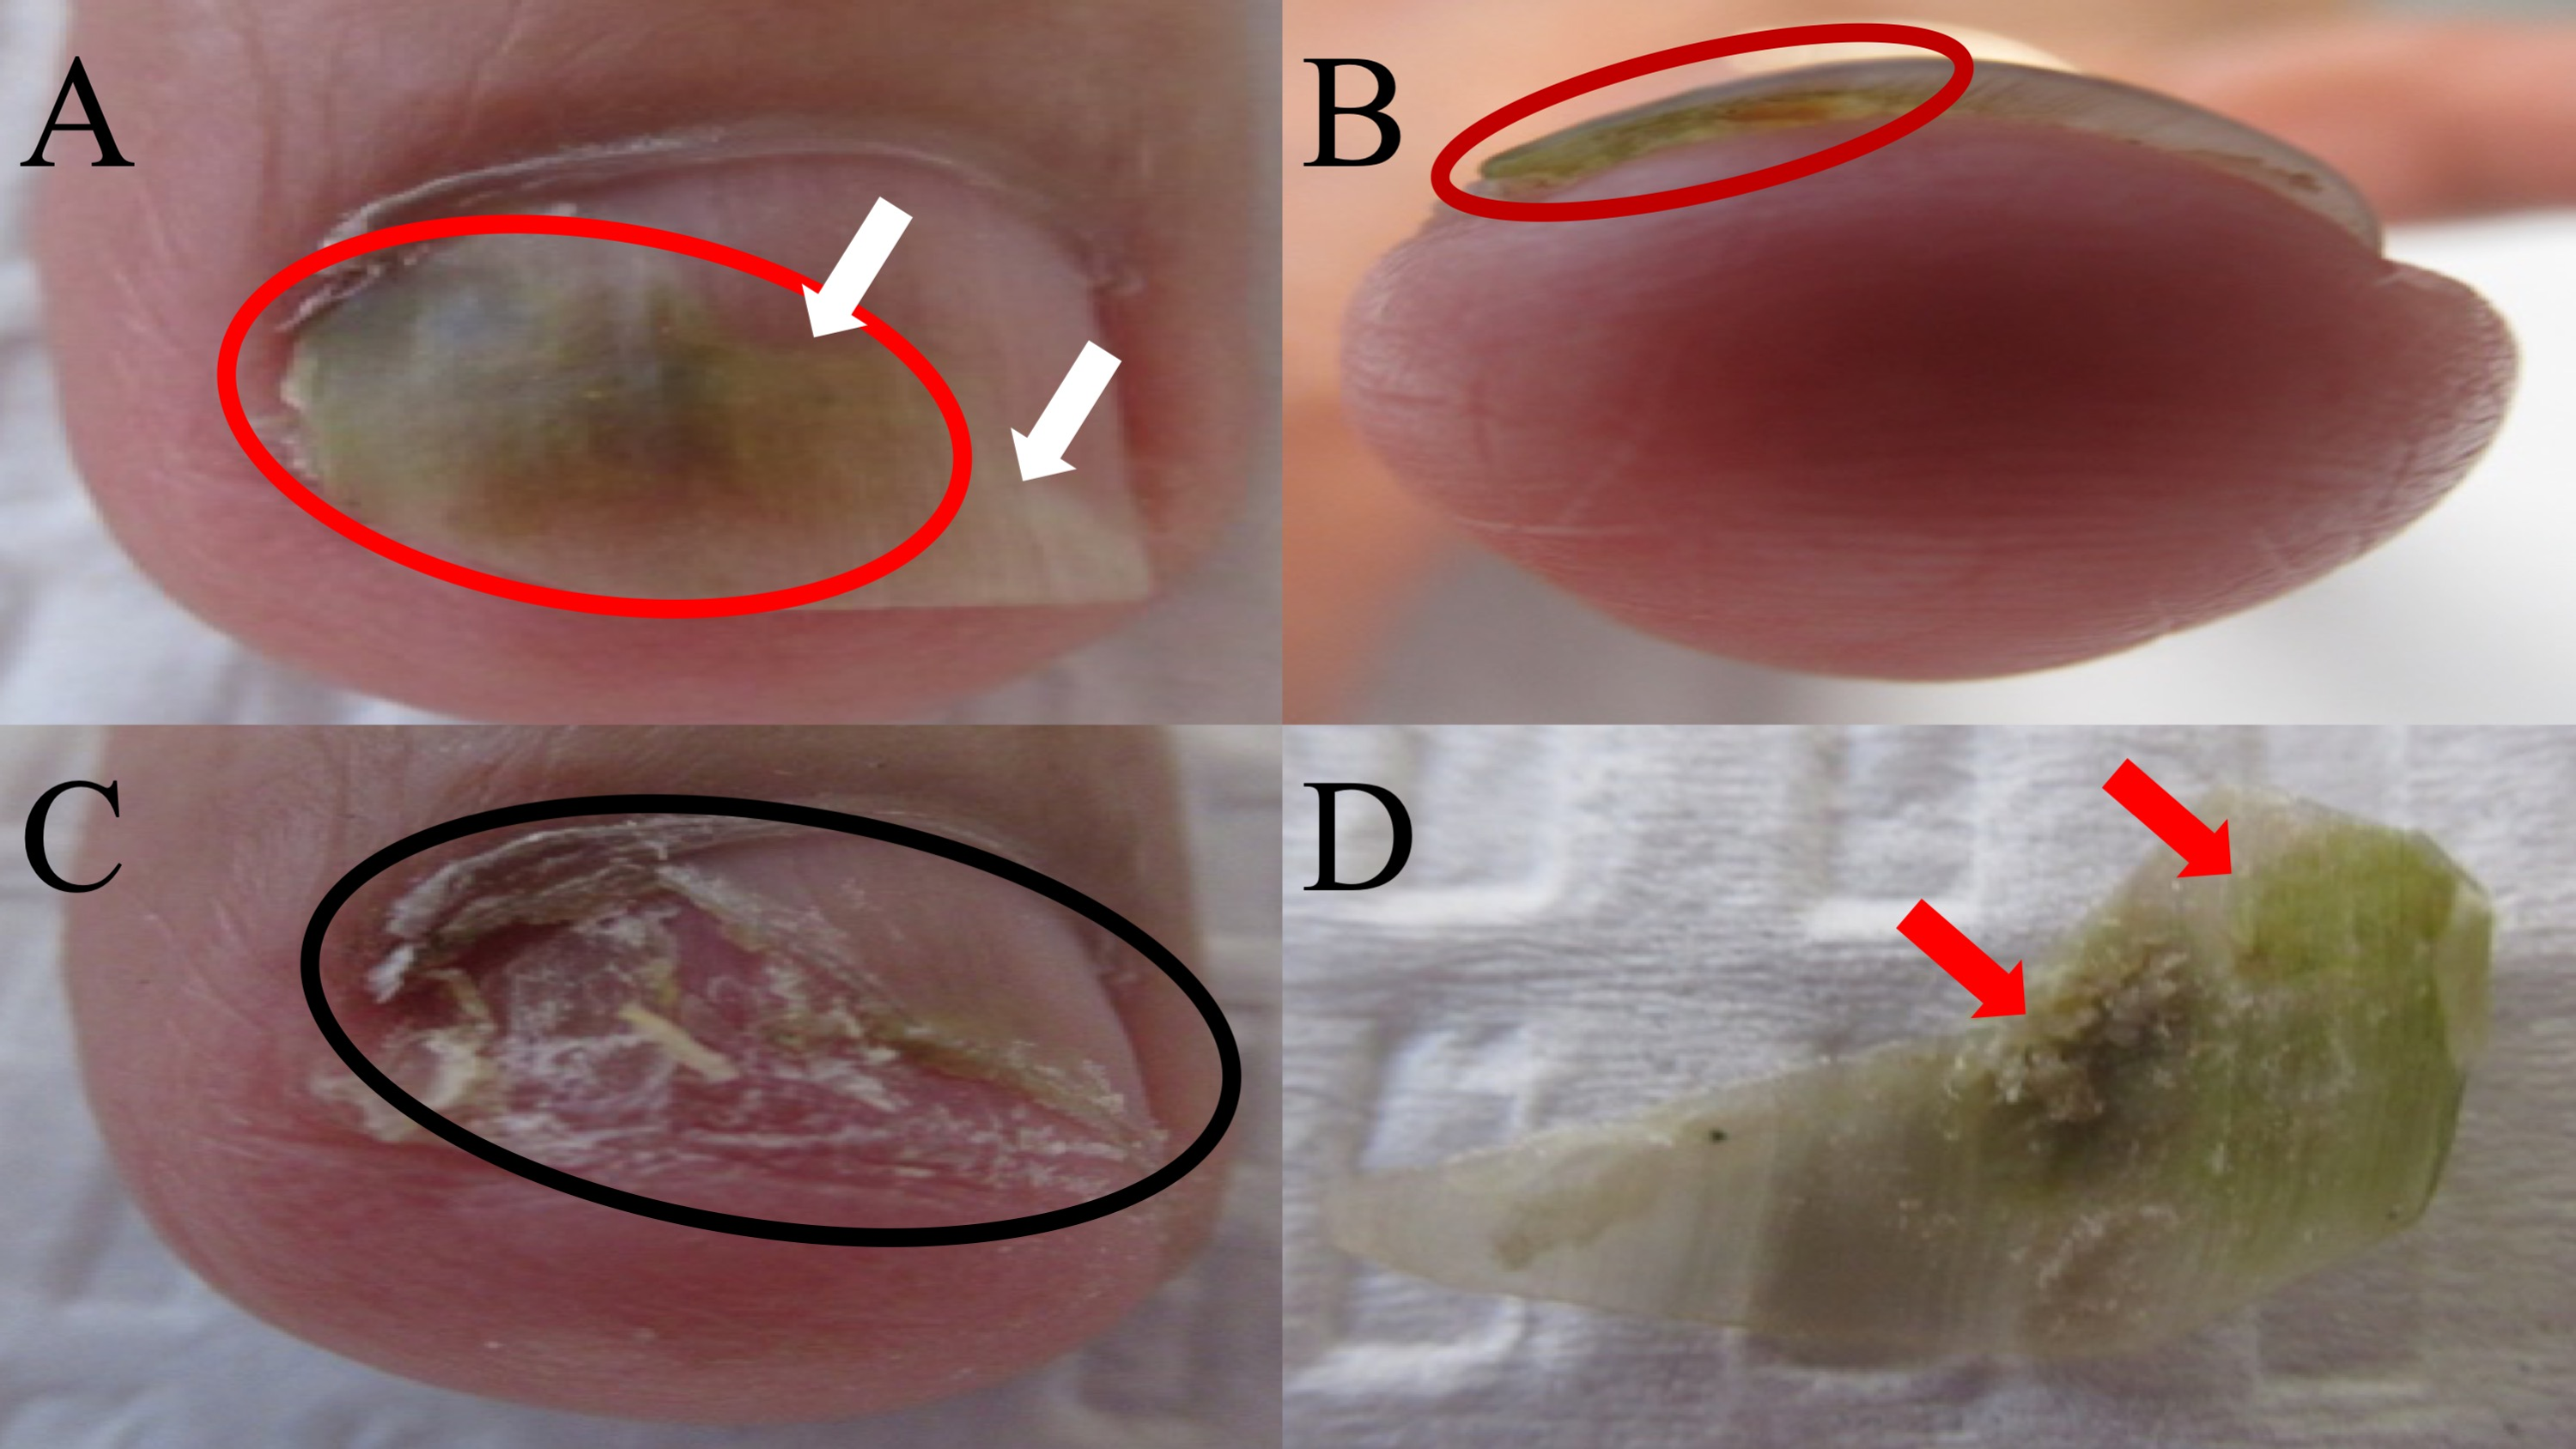 Cureus | Fungal Viridionychia: Onychomycosis-Induced Chloronychia Caused by  Candida parapsilosis-Associated Green Nail Discoloration | Article